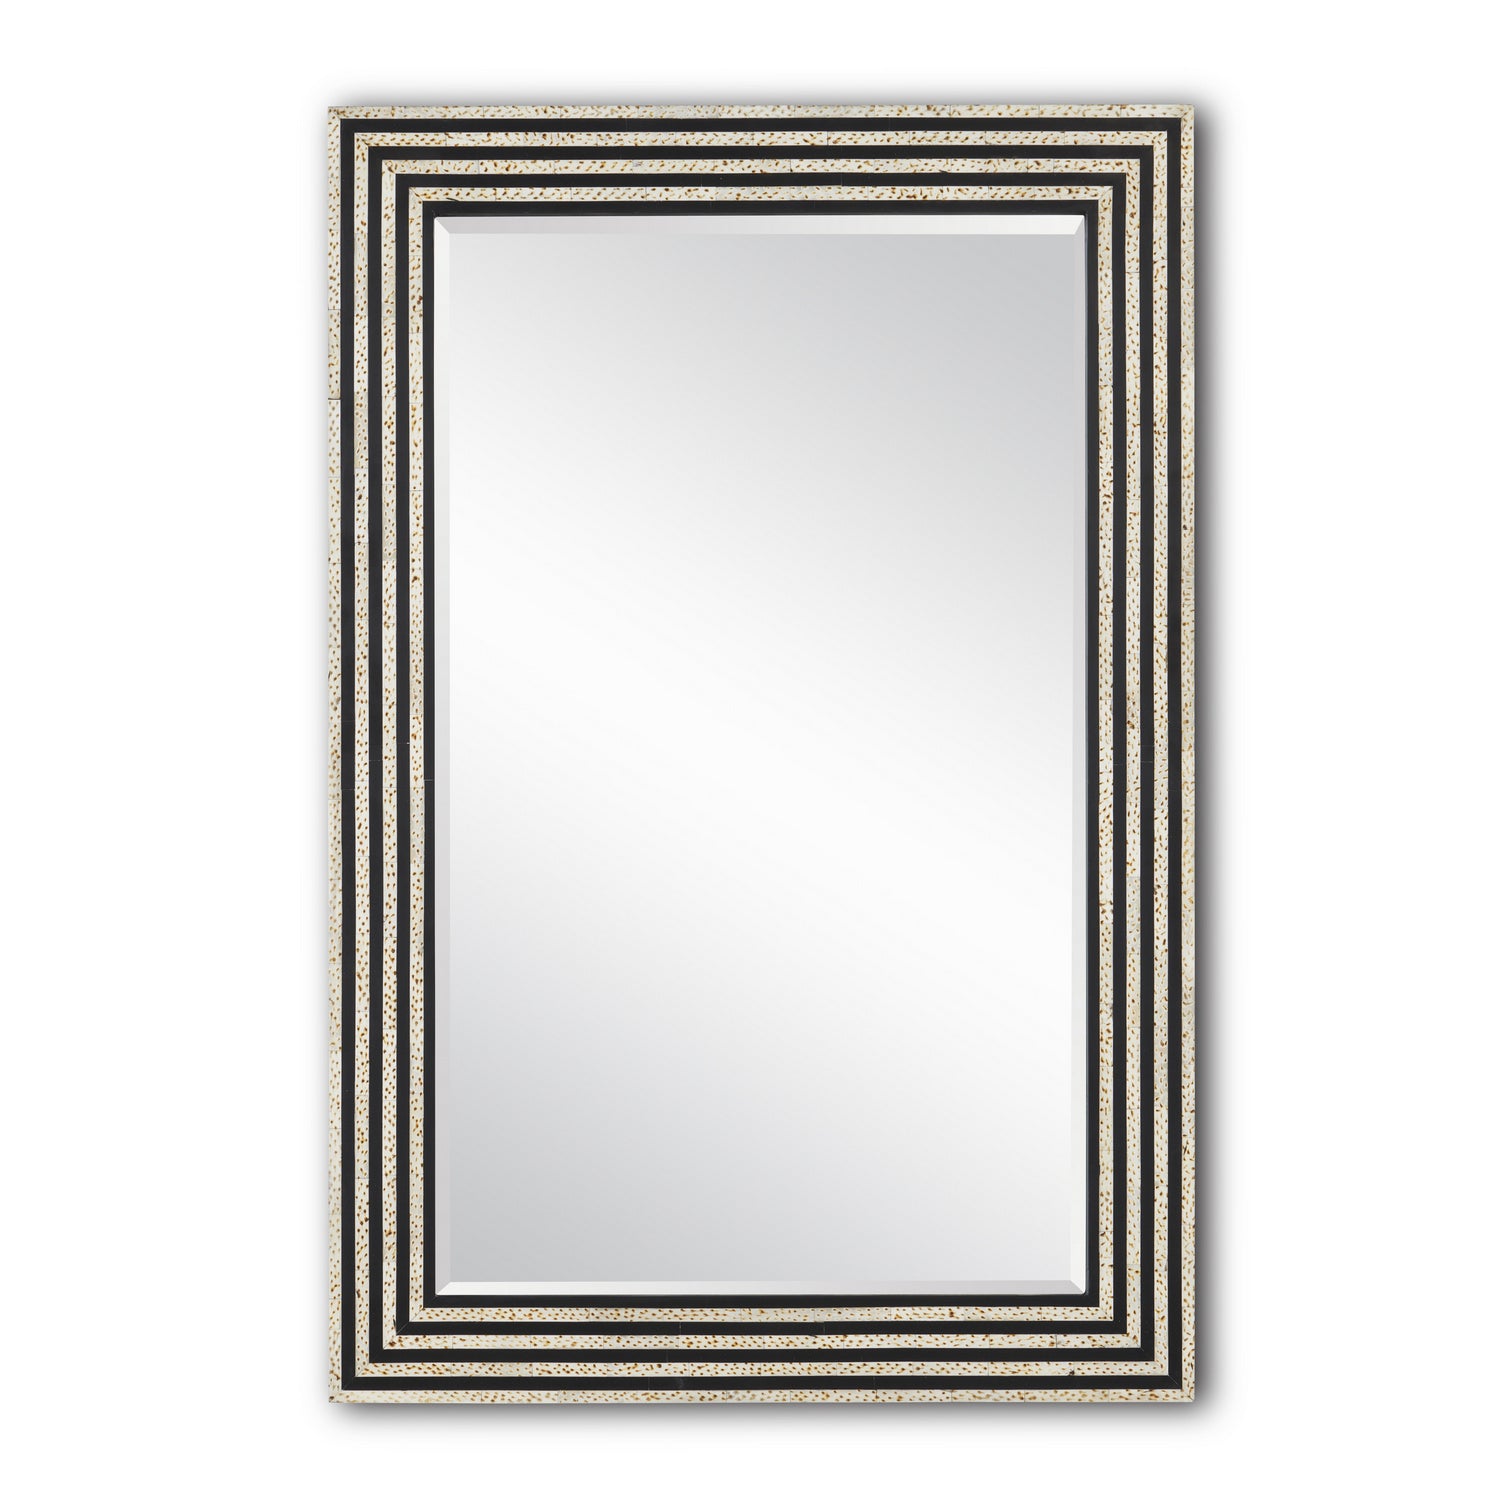 Mirror from the Taurus collection in White Speckle/Black/Mirror finish